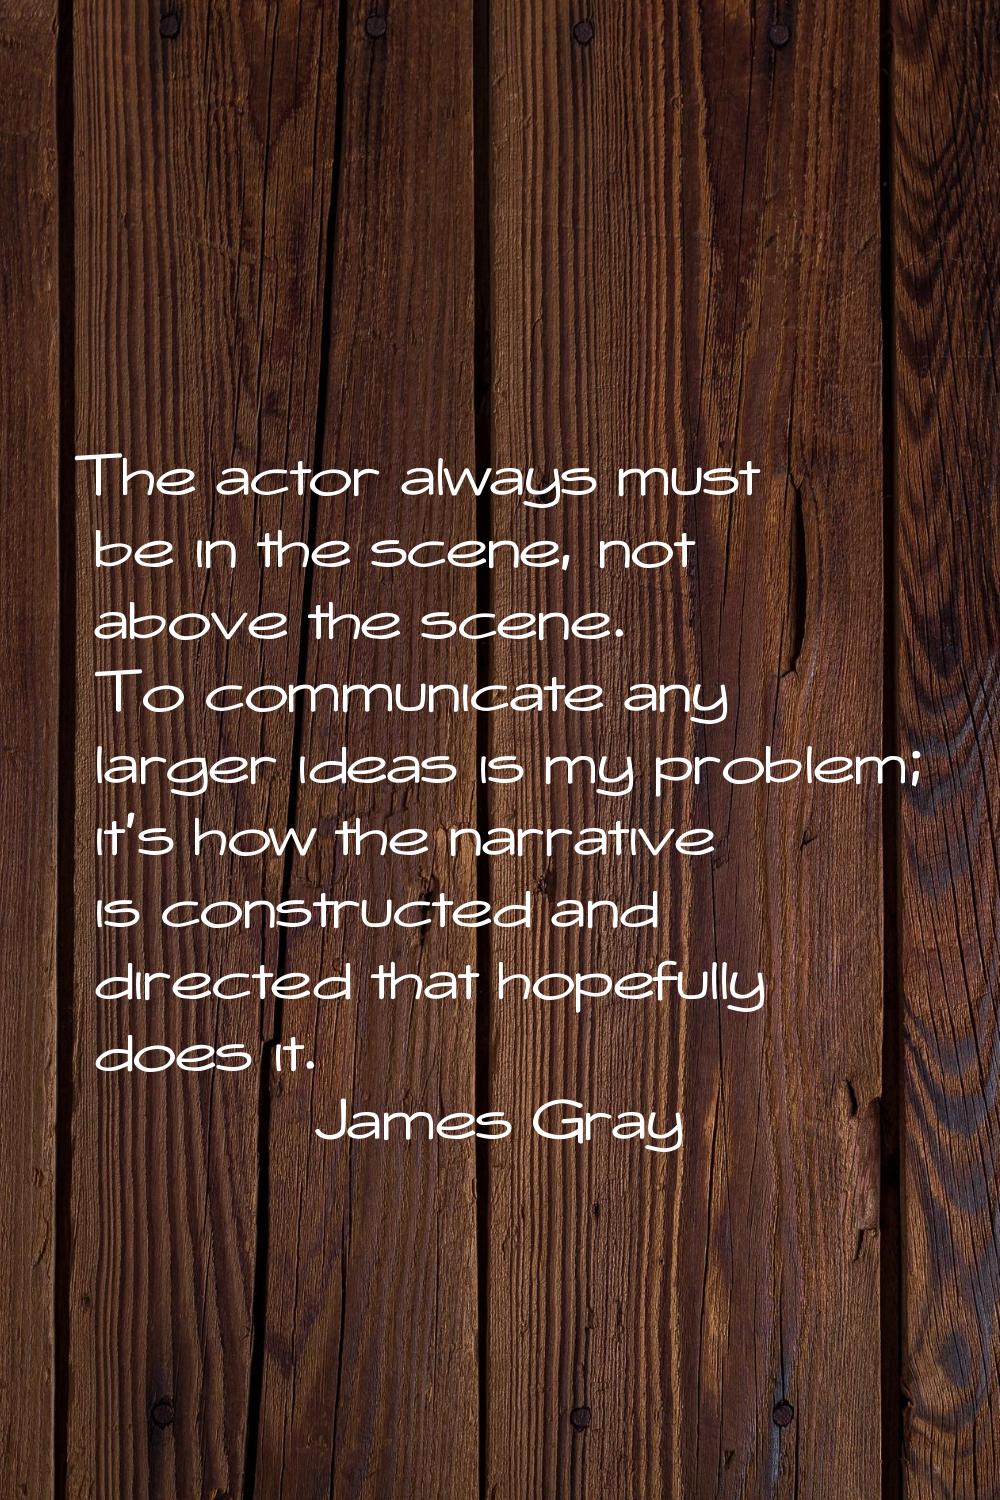 The actor always must be in the scene, not above the scene. To communicate any larger ideas is my p